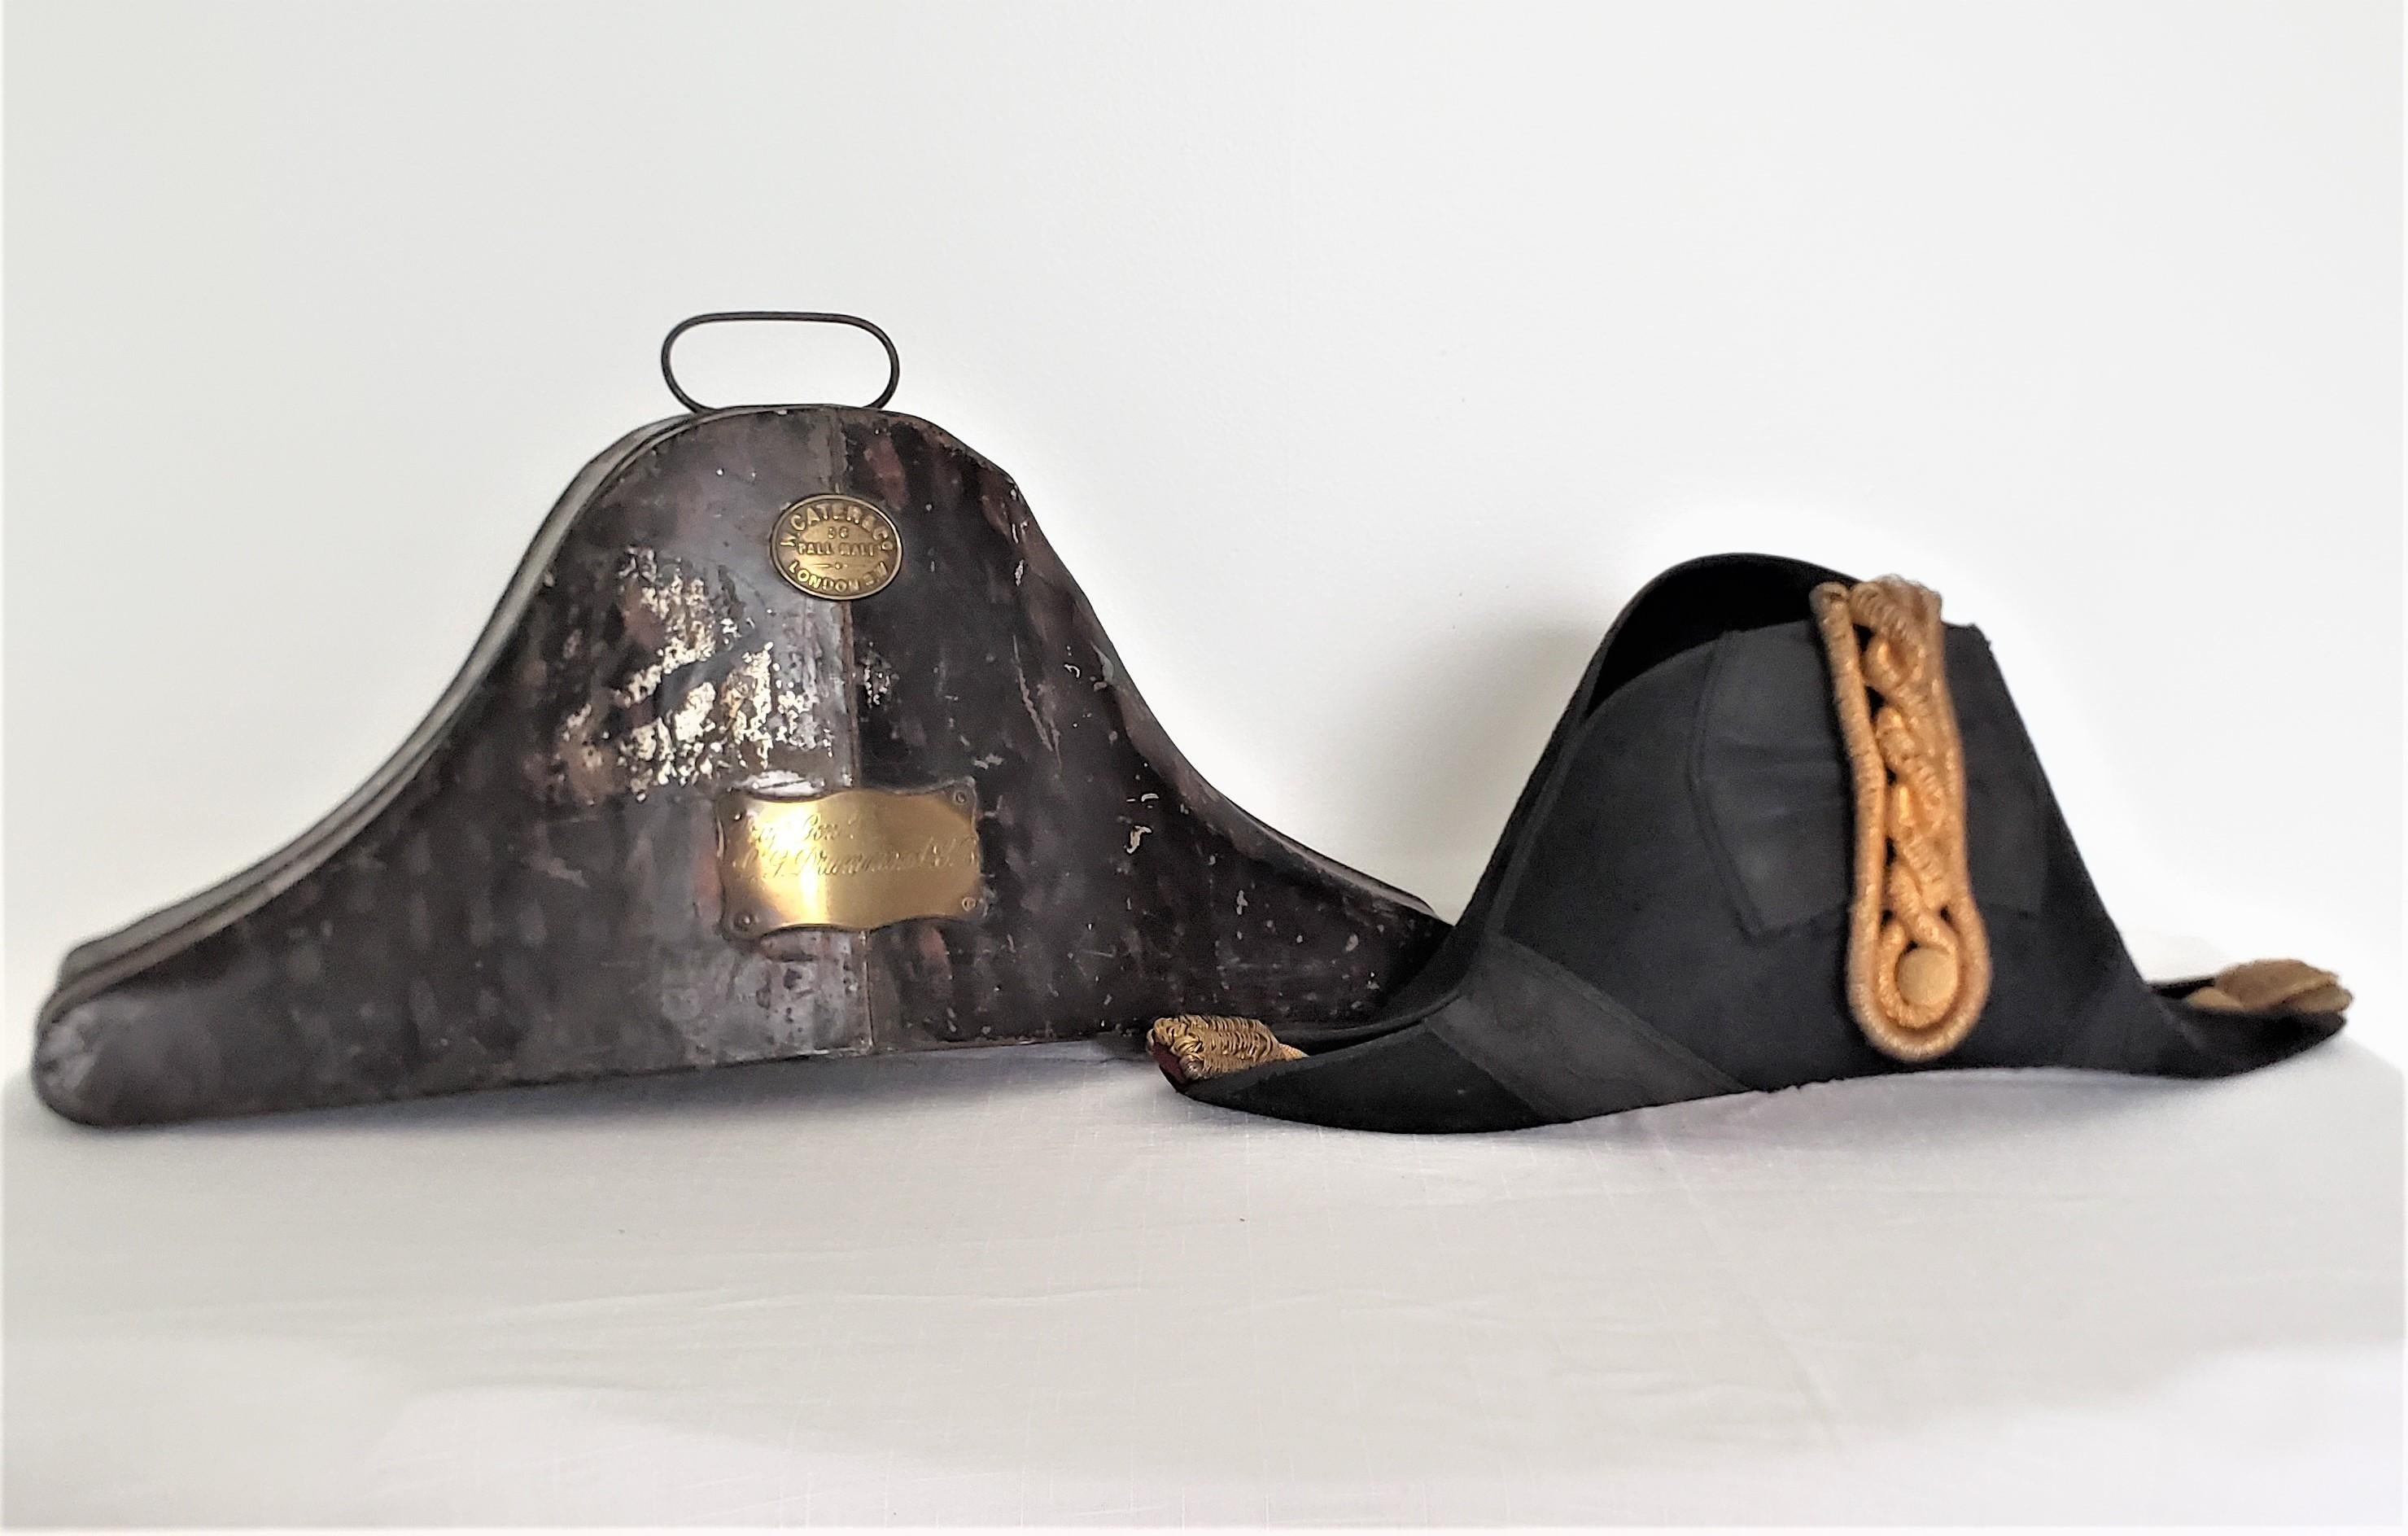 This antique military hat and fitted hat box was made by W. Cater of London England for the Brigadier General Lawrence Drummond in approximately 1915 in the period style. The hat is shaped in the period bi-cornered manner with gold tassels and is